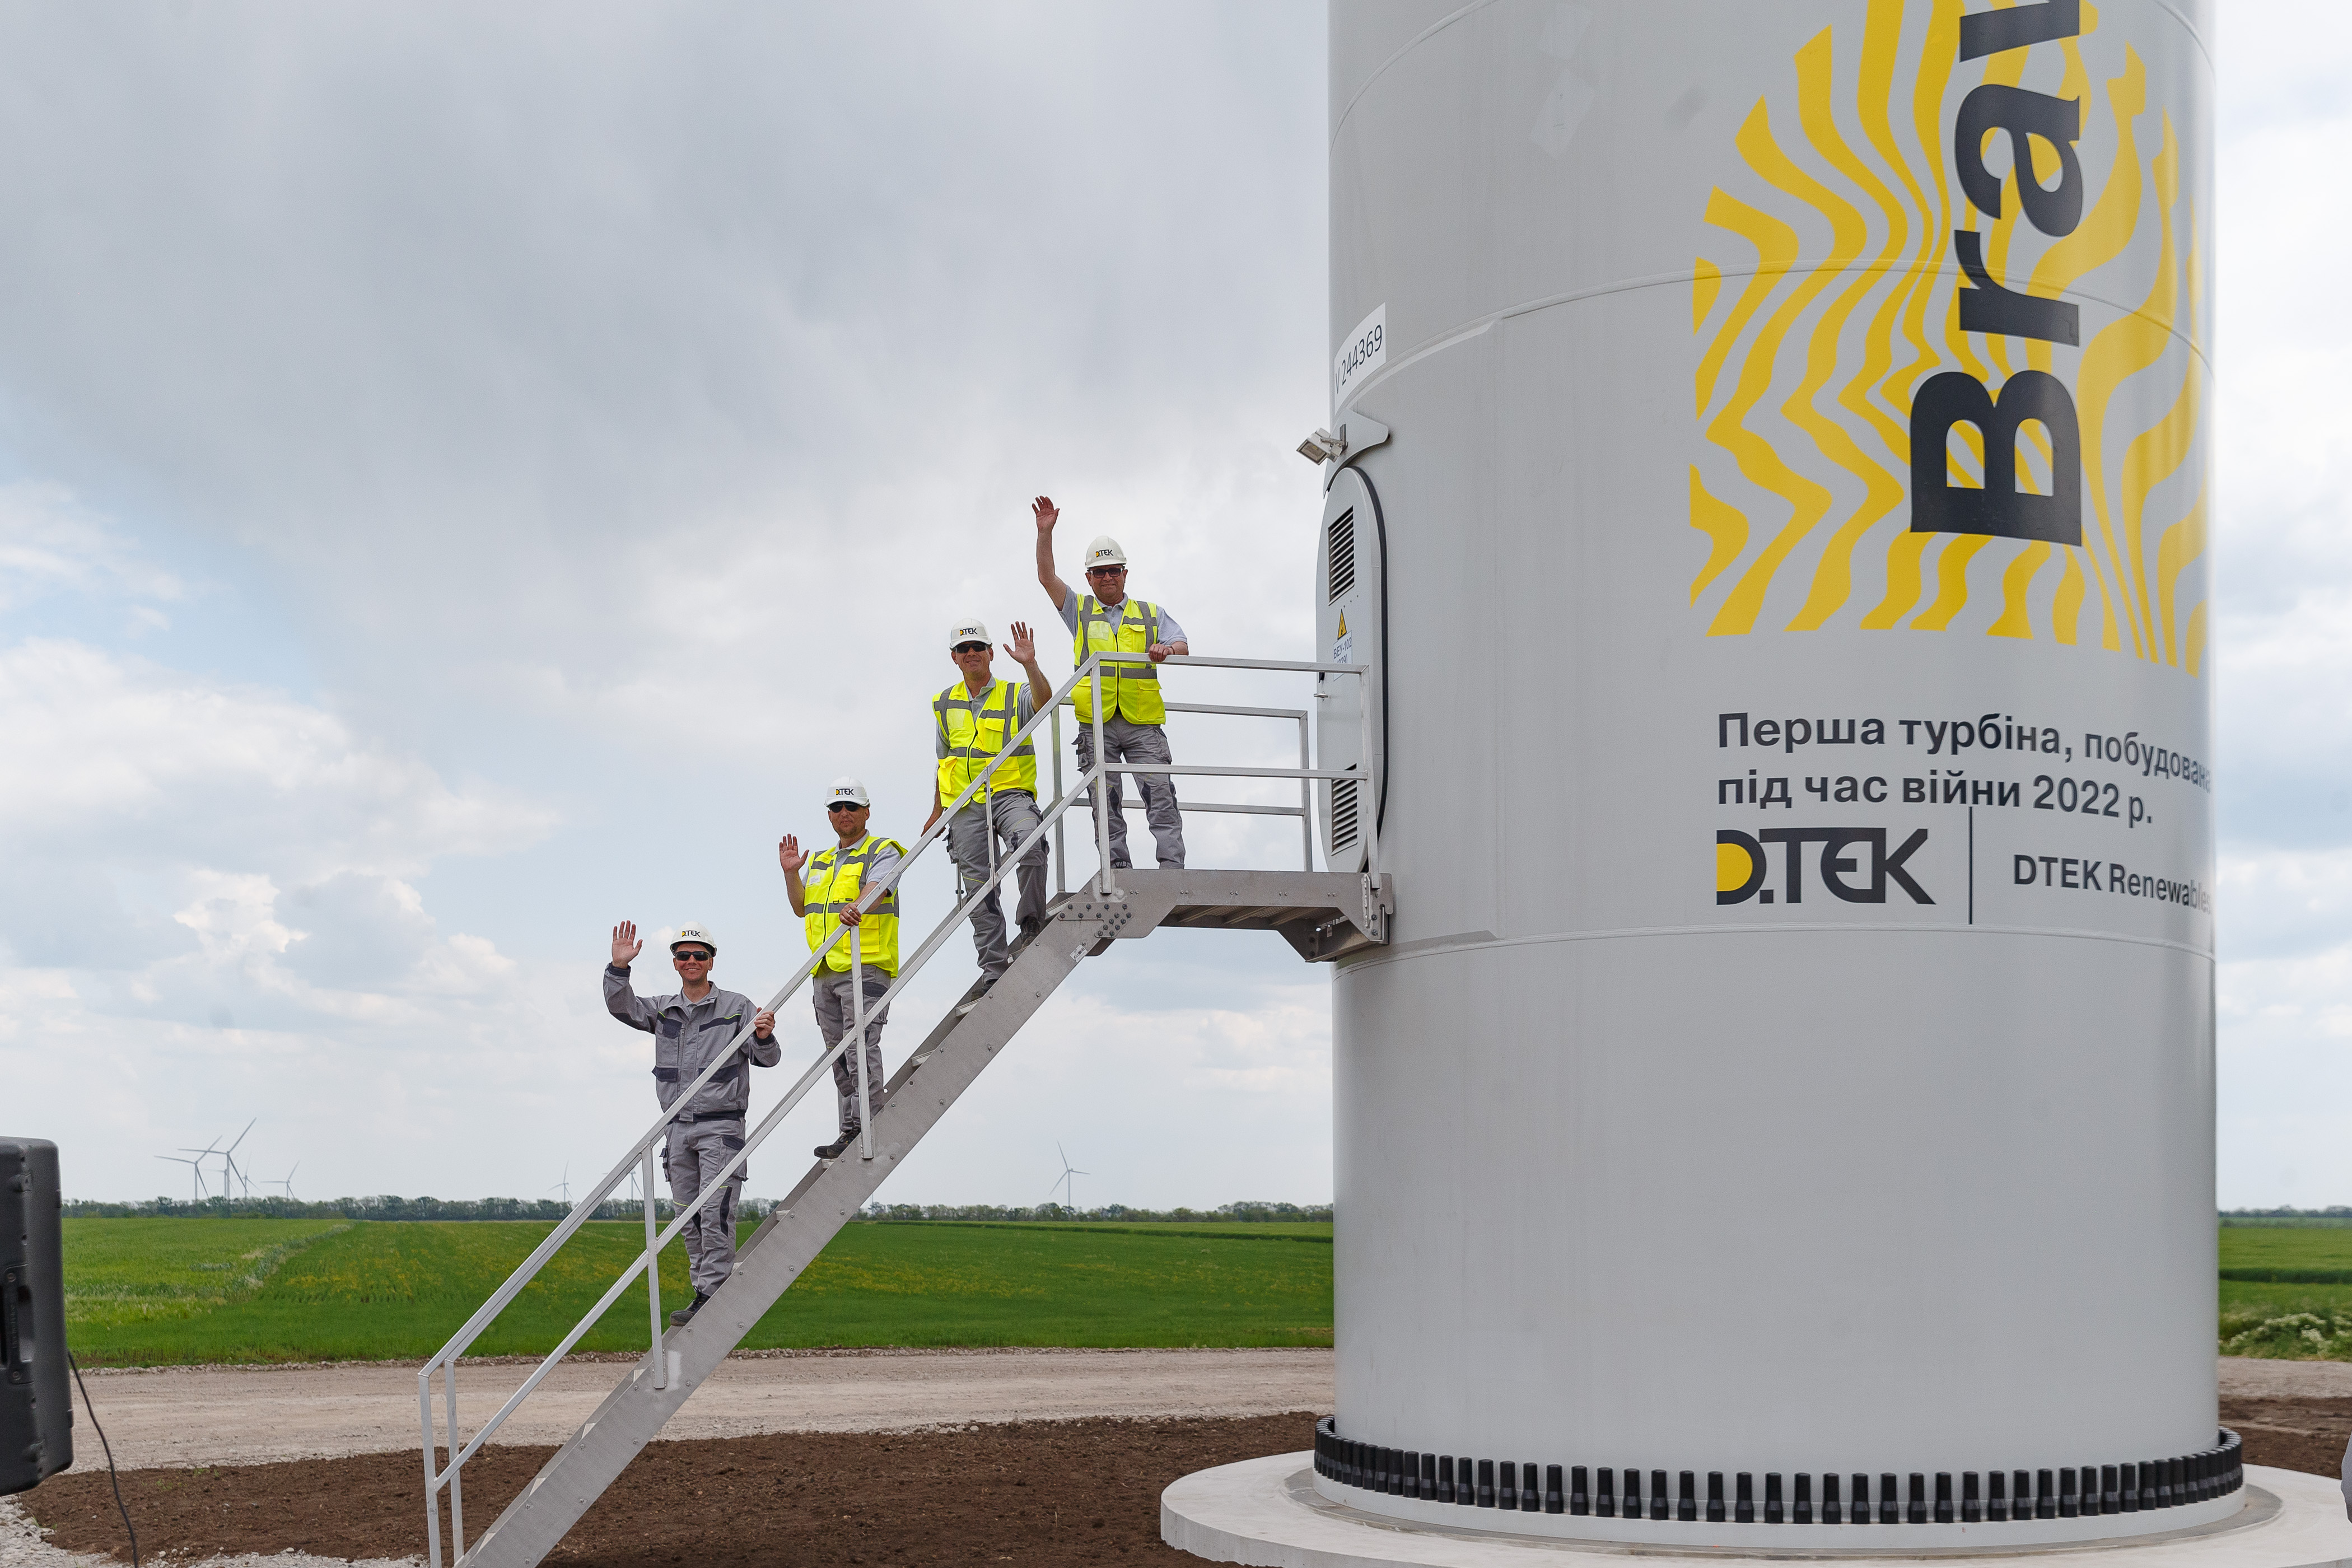 DTEK opens wind farm in Ukraine amid war to build back greener after russian attacks. Picture 2